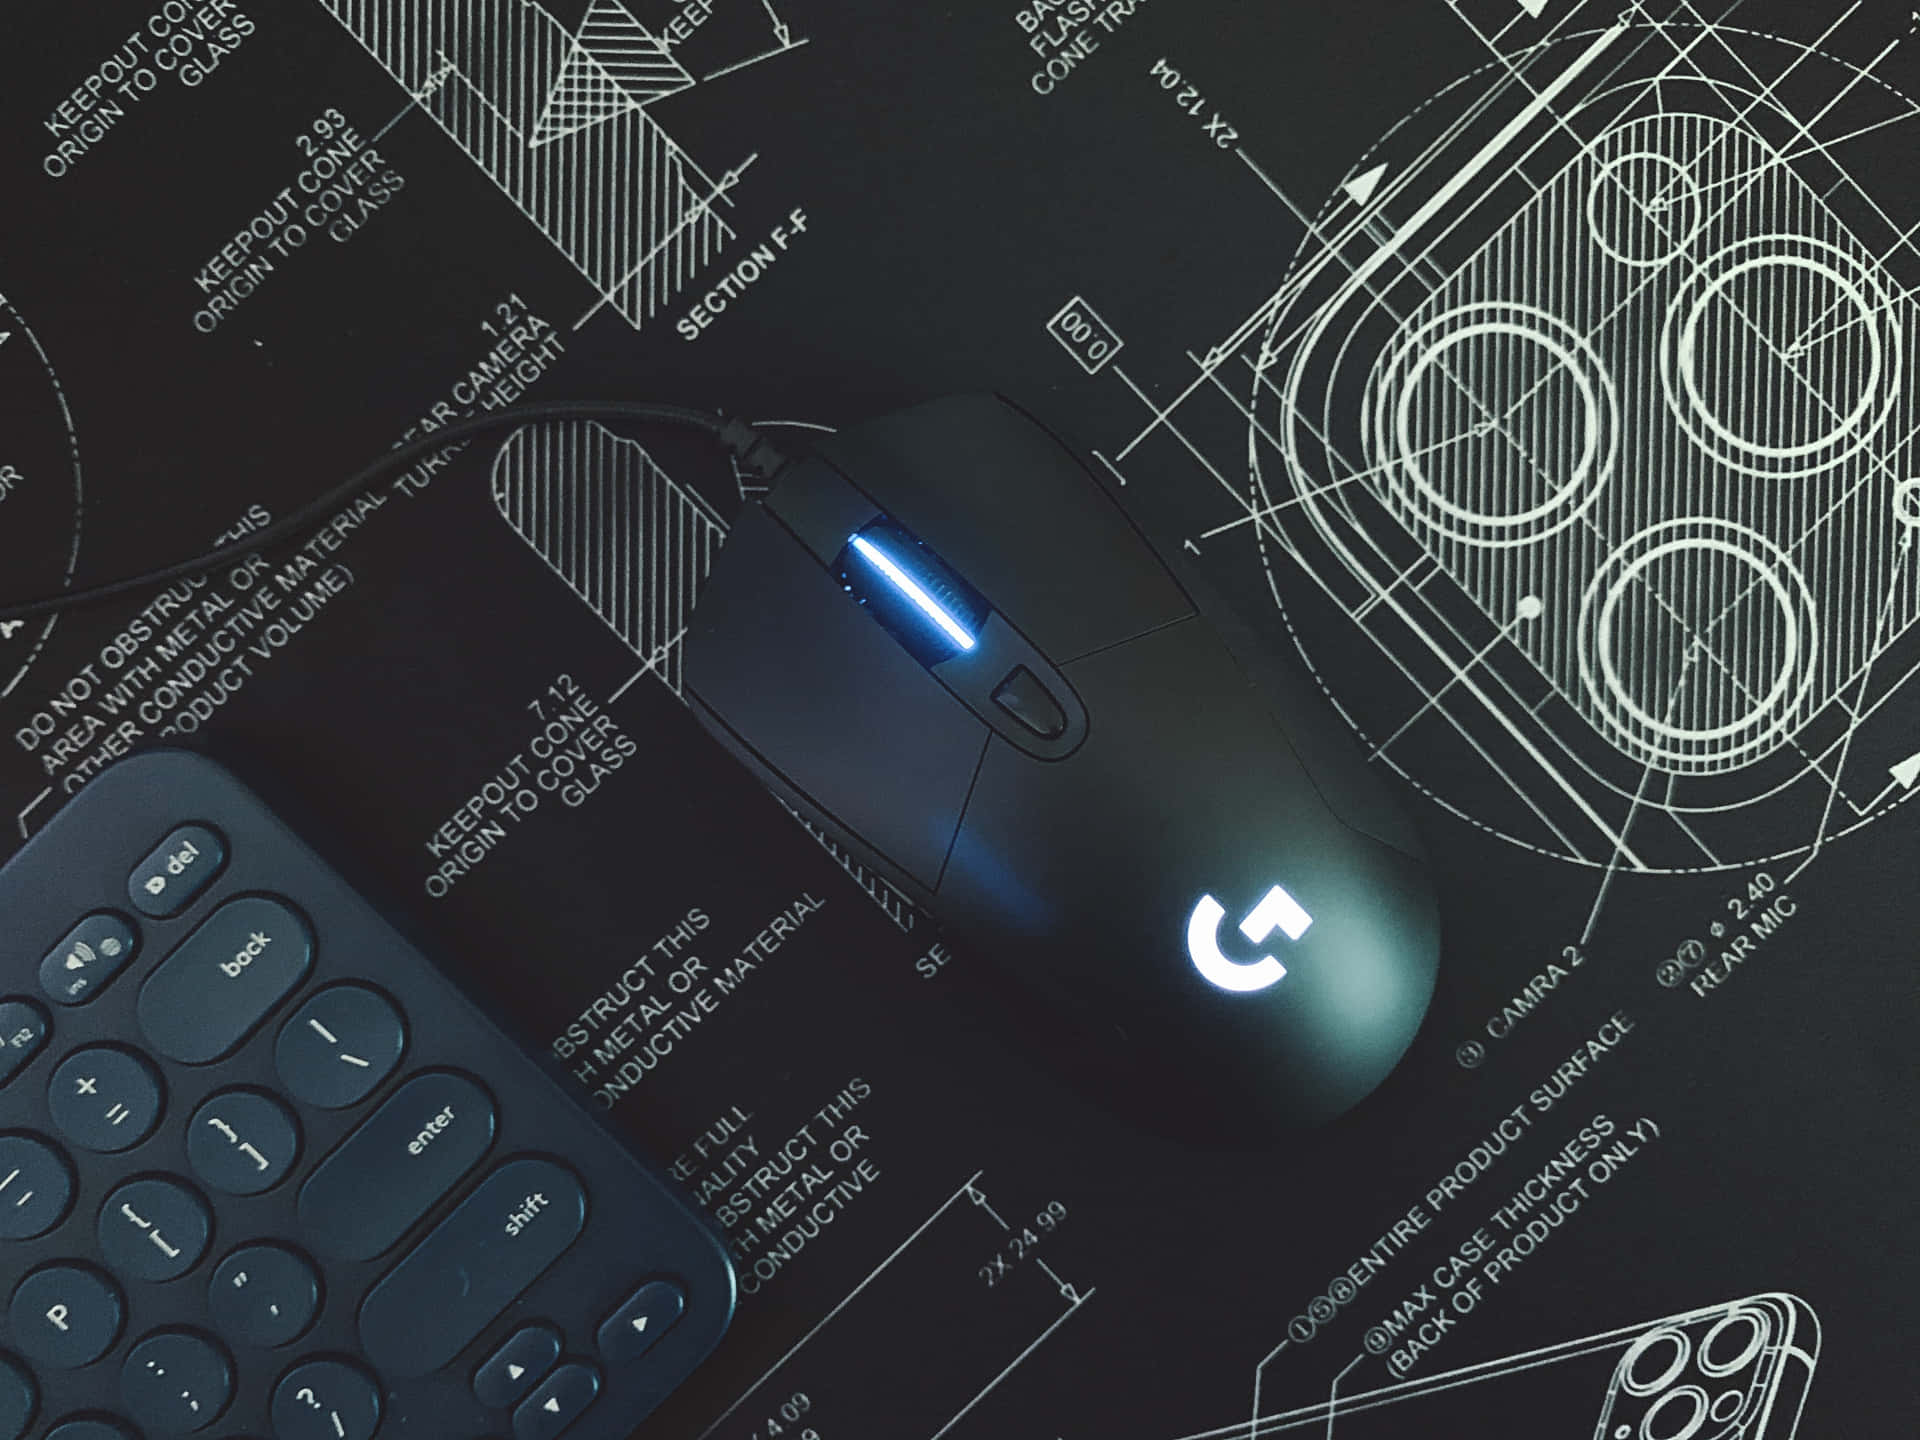 The Blue Microphones brand is being sunset in favor of Logitech G